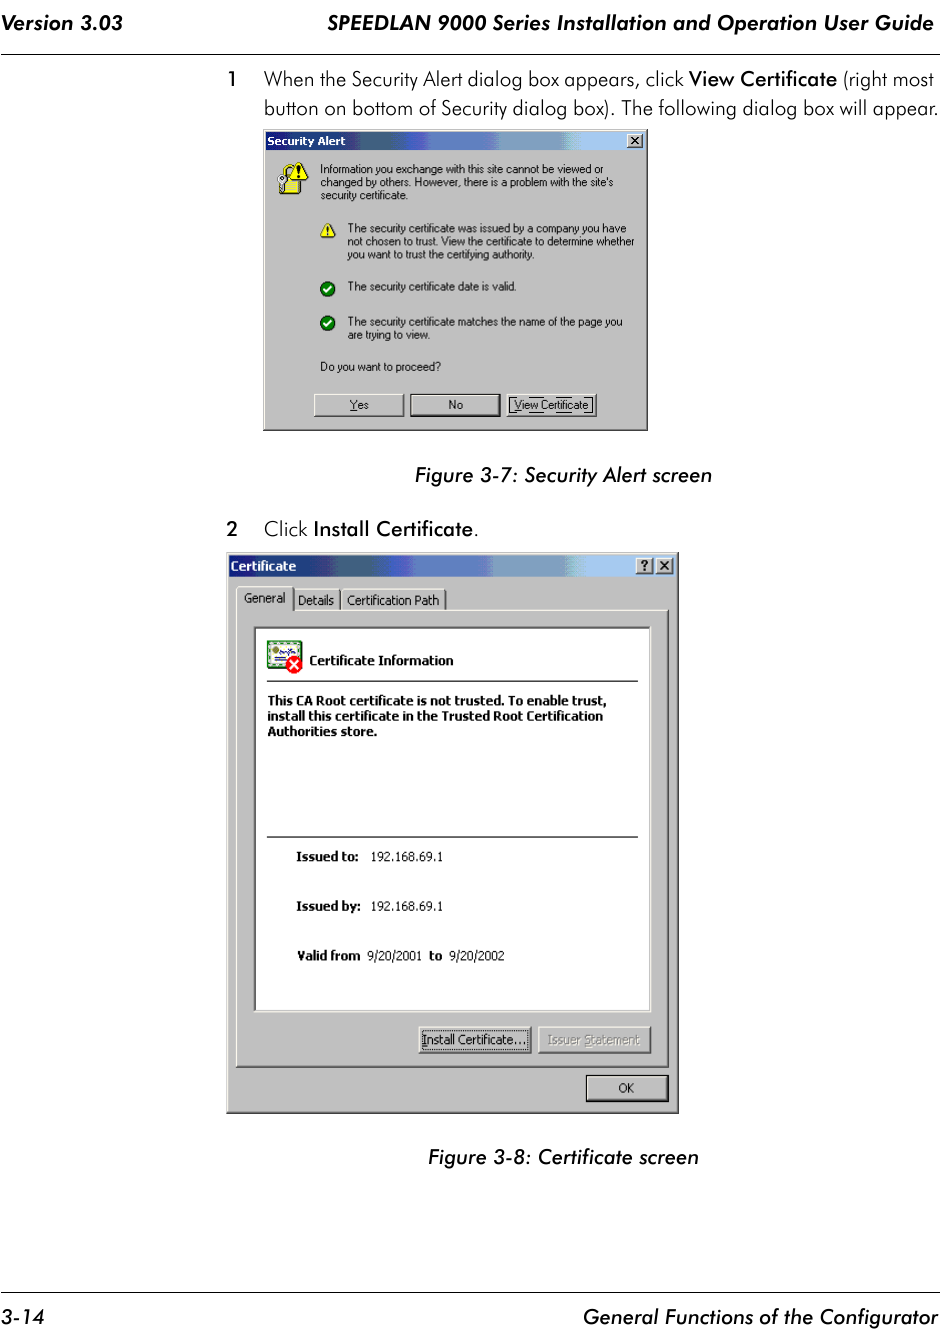 Version 3.03                                 SPEEDLAN 9000 Series Installation and Operation User Guide 3-14 General Functions of the Configurator1When the Security Alert dialog box appears, click View Certificate (right most button on bottom of Security dialog box). The following dialog box will appear.Figure 3-7: Security Alert screen2Click Install Certificate. Figure 3-8: Certificate screen